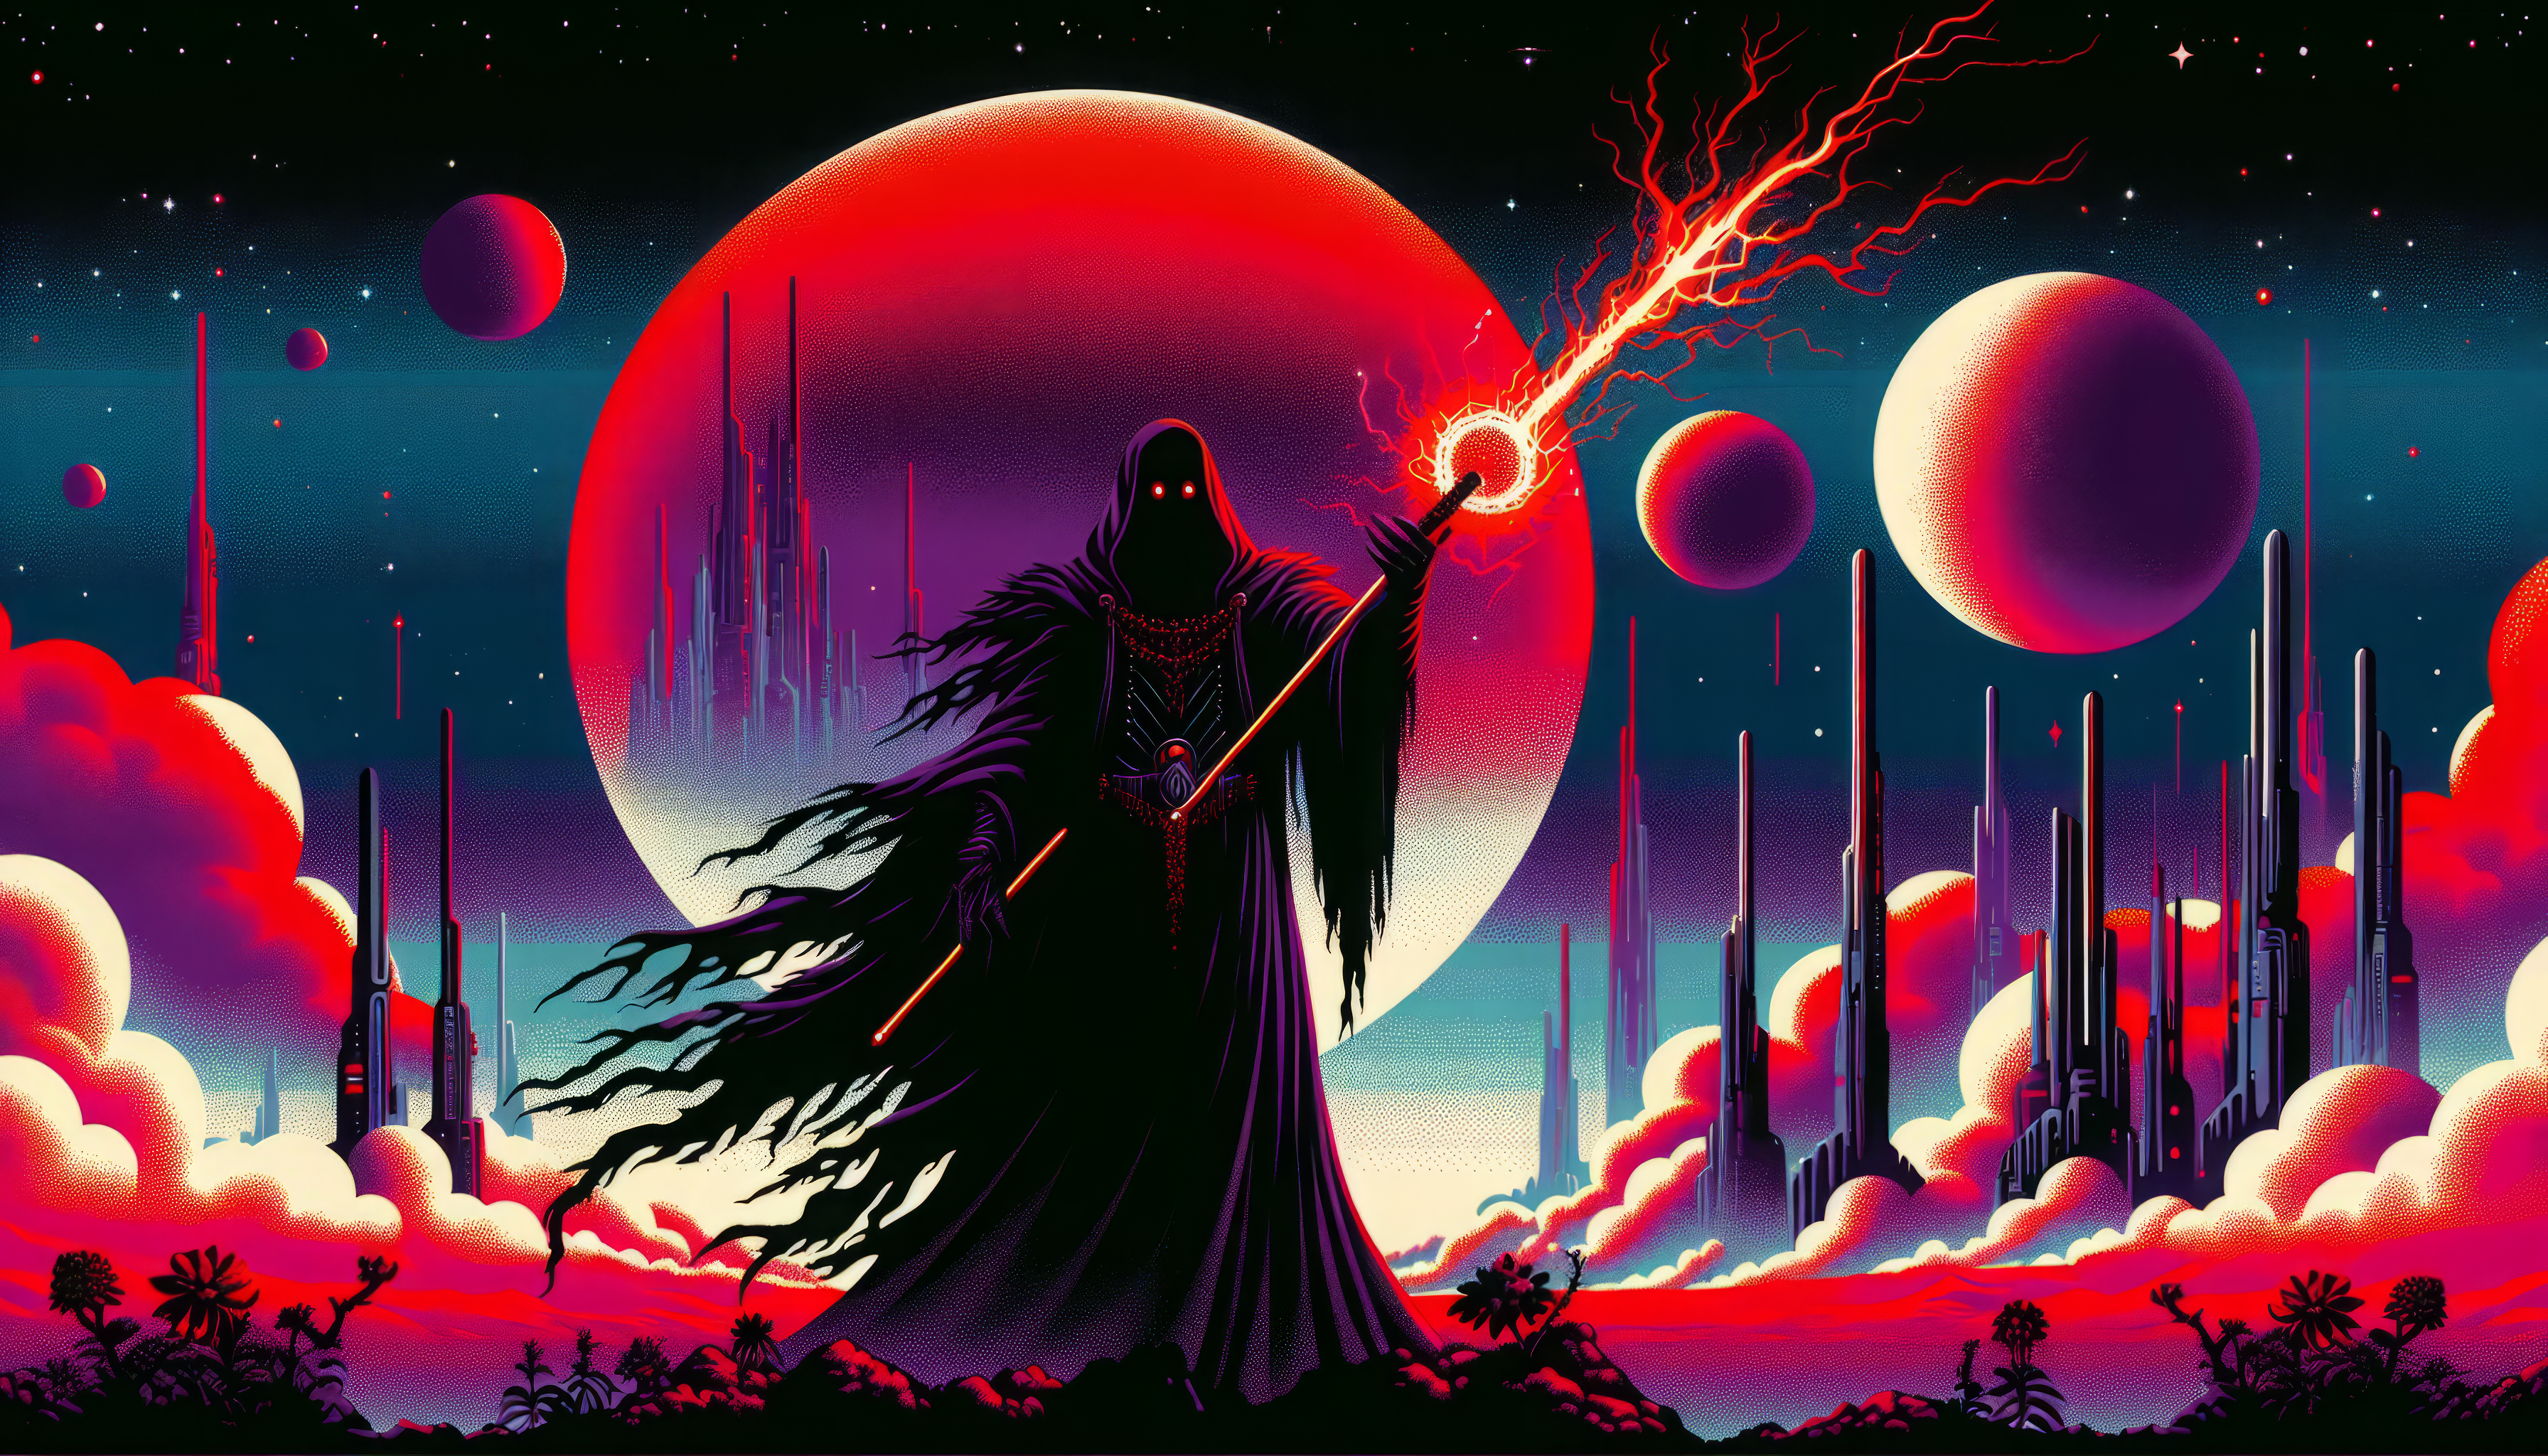 Sith Lord wielding Force lightning against a backdrop of multiple planets and futuristic cityscape, perfect for HD Star Wars-themed desktop wallpaper.